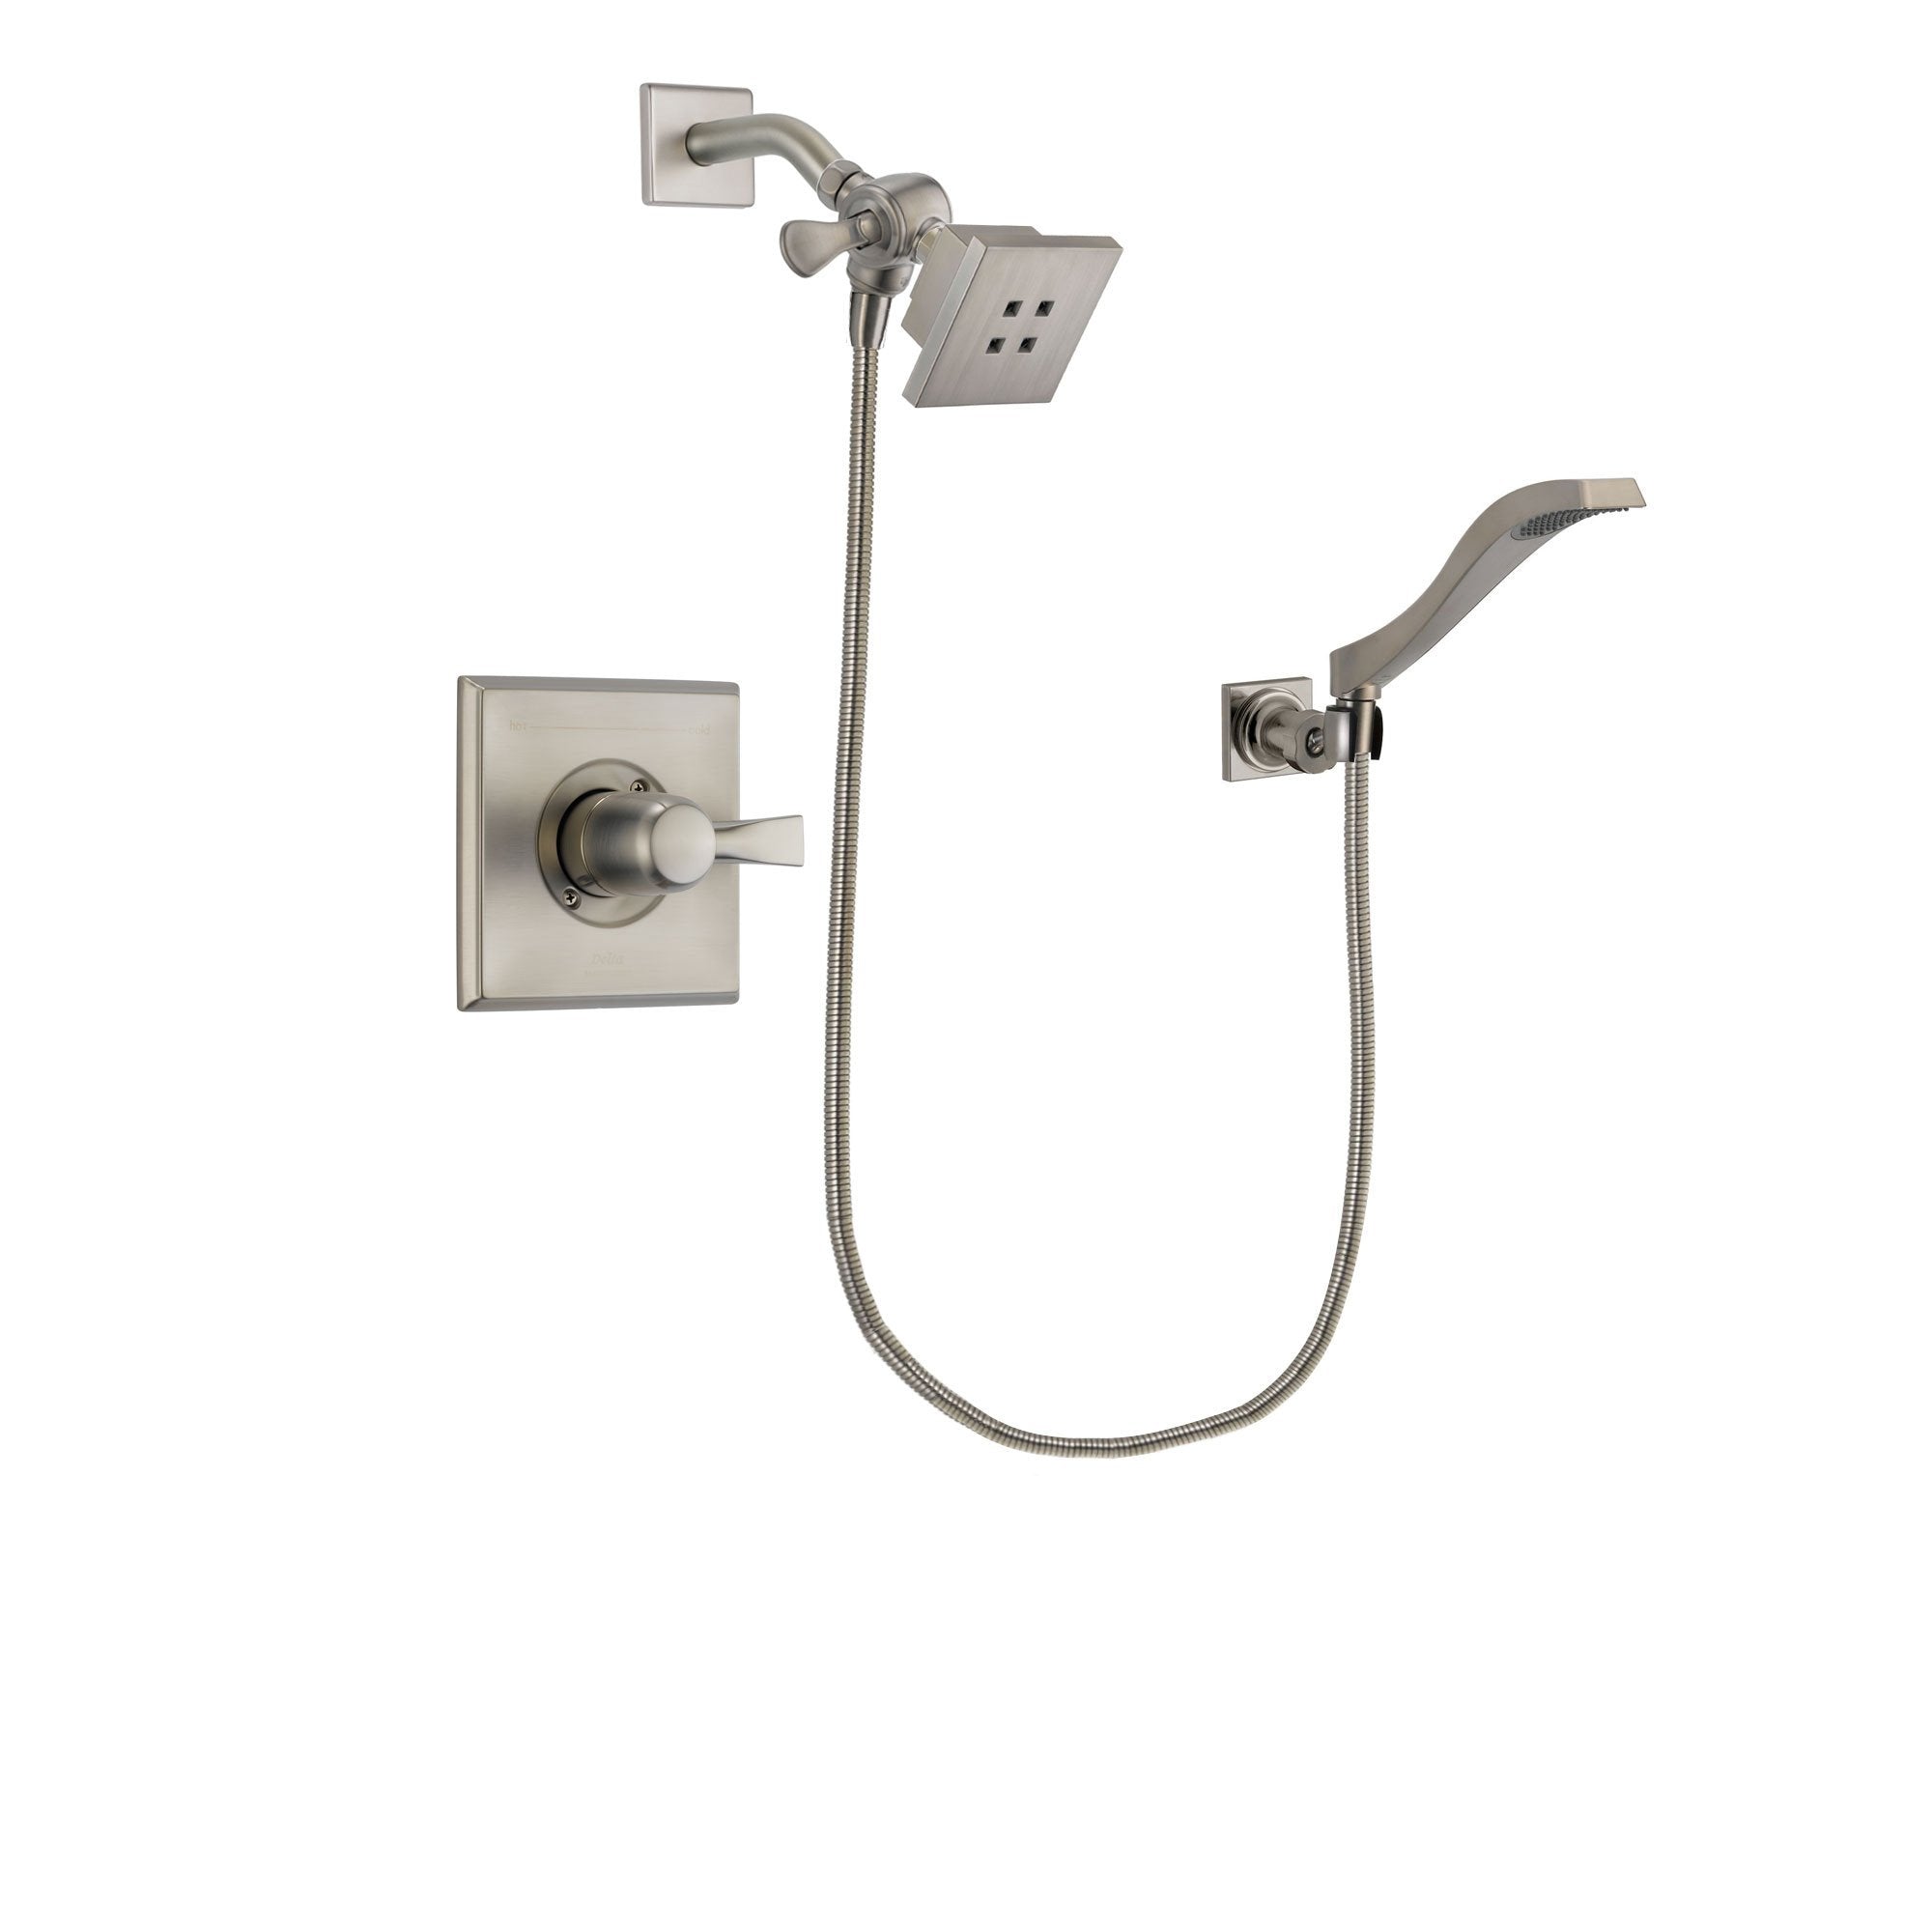 Delta Dryden Stainless Steel Finish Shower Faucet System Package with Square Showerhead and Modern Wall Mount Handheld Shower Spray Includes Rough-in Valve DSP2064V